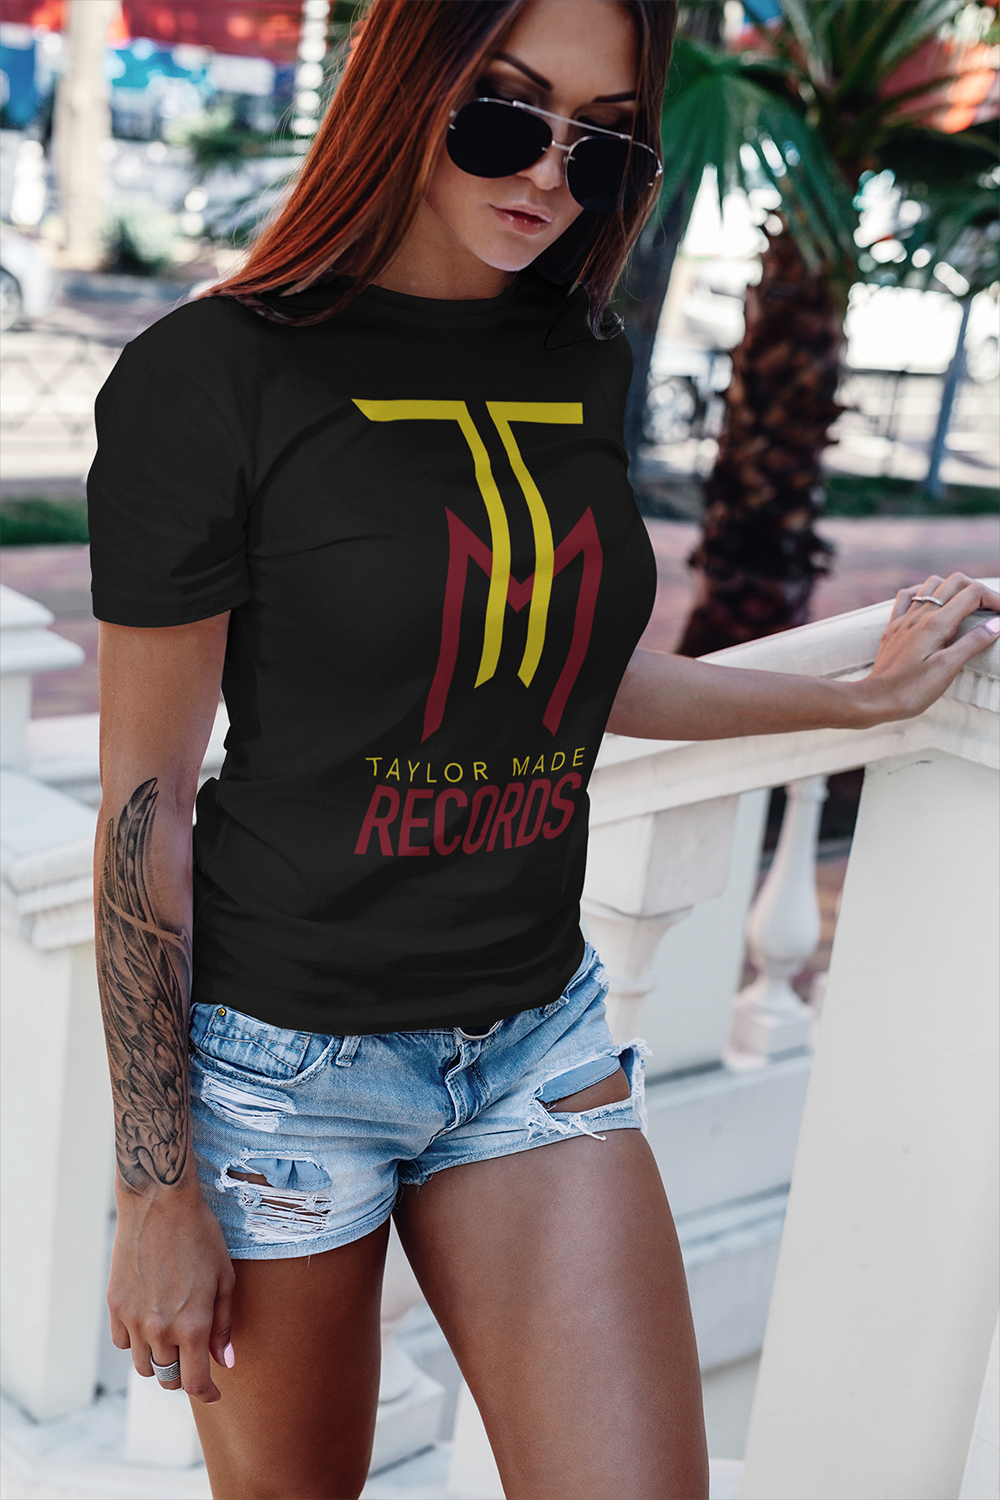 t-shirt-mockup-featuring-a-tattooed-woman-with-sunglasses-2258-el1.png